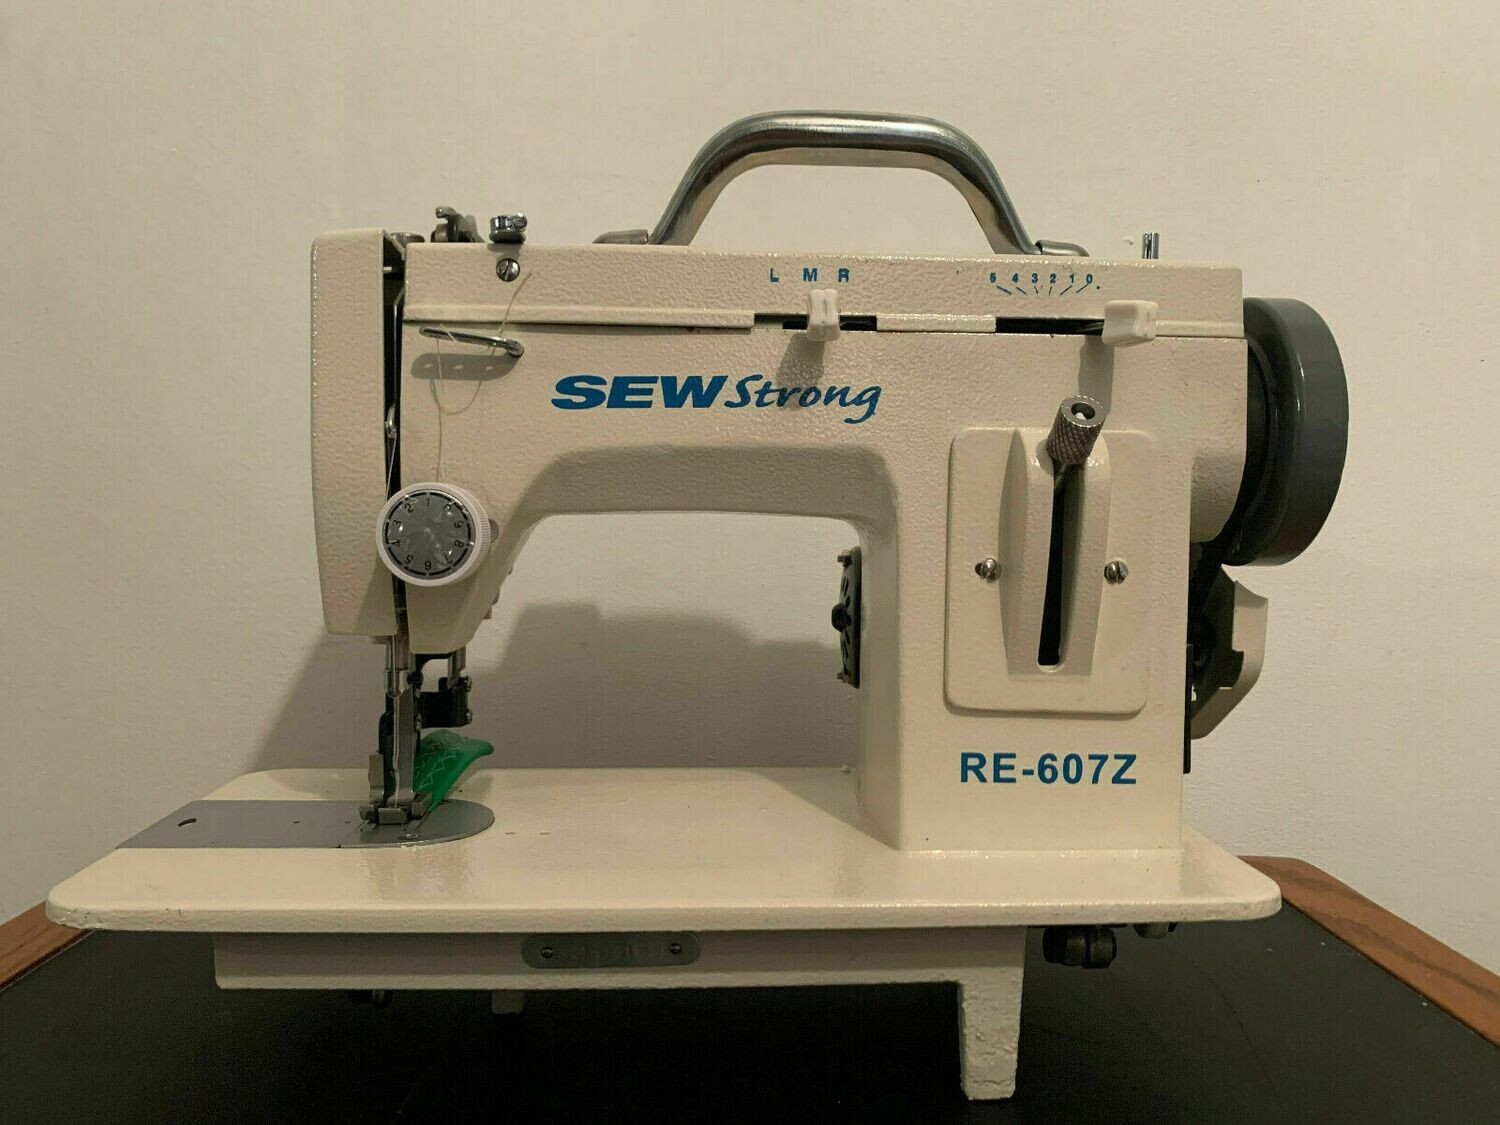 Consew CP146RL Portable Walking Foot Straight Stitch and Zig Zag Leather  Sewing Machine